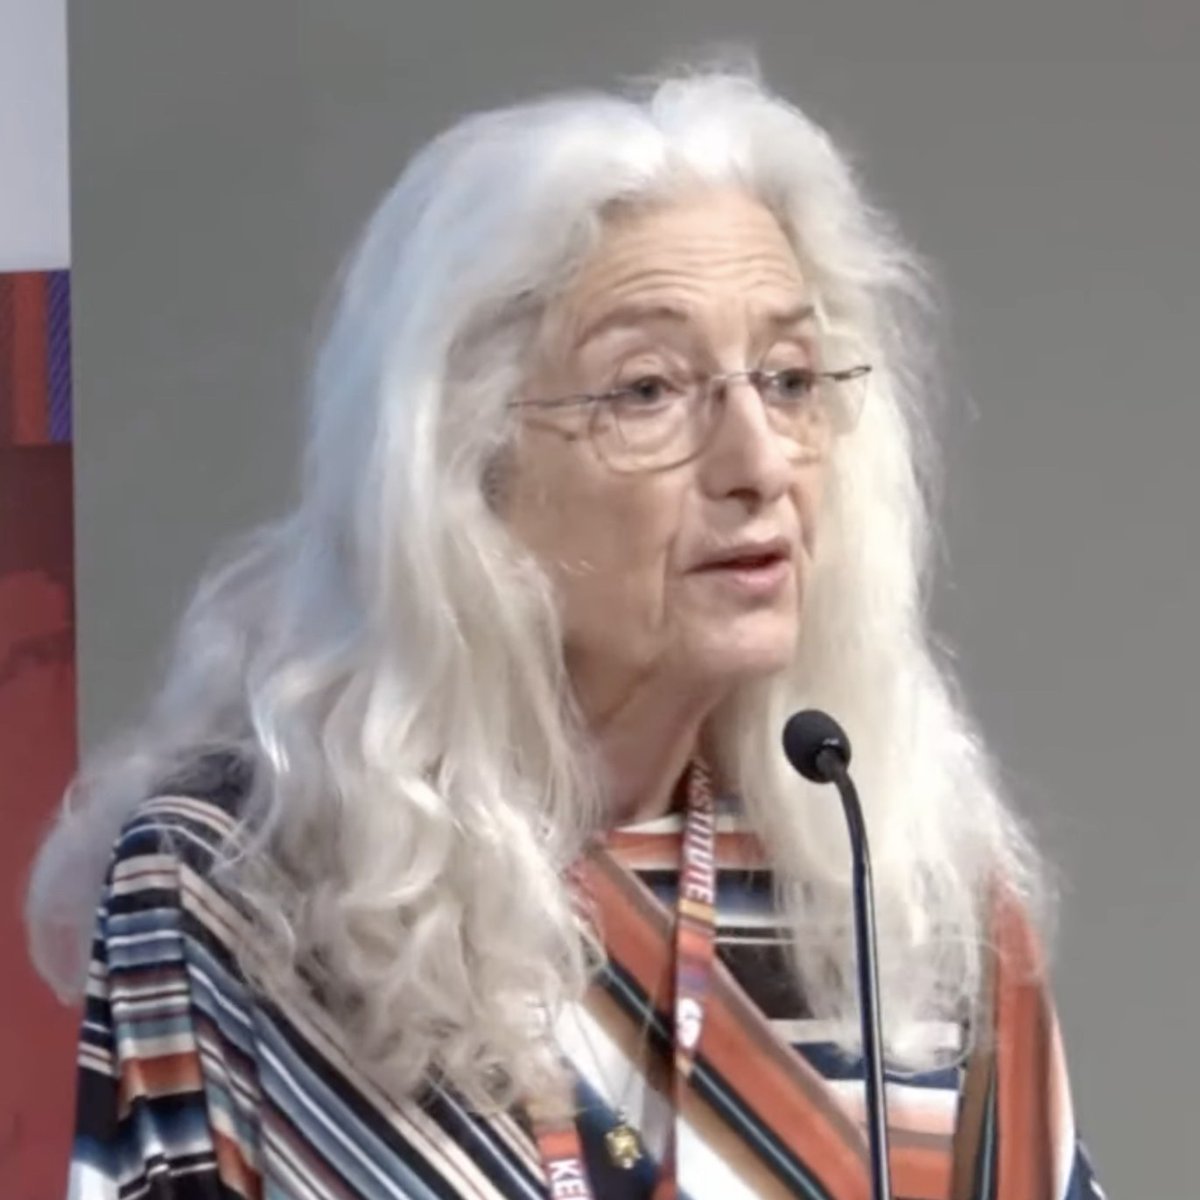 Stressing the importance of political parties, @EvelyneHuber (UNC Chapel Hill) asserts that voters who lack trust in parties become susceptible to populist appeals. Watch at bit.ly/42Jf8XI #globaldemocracy #GDC2024